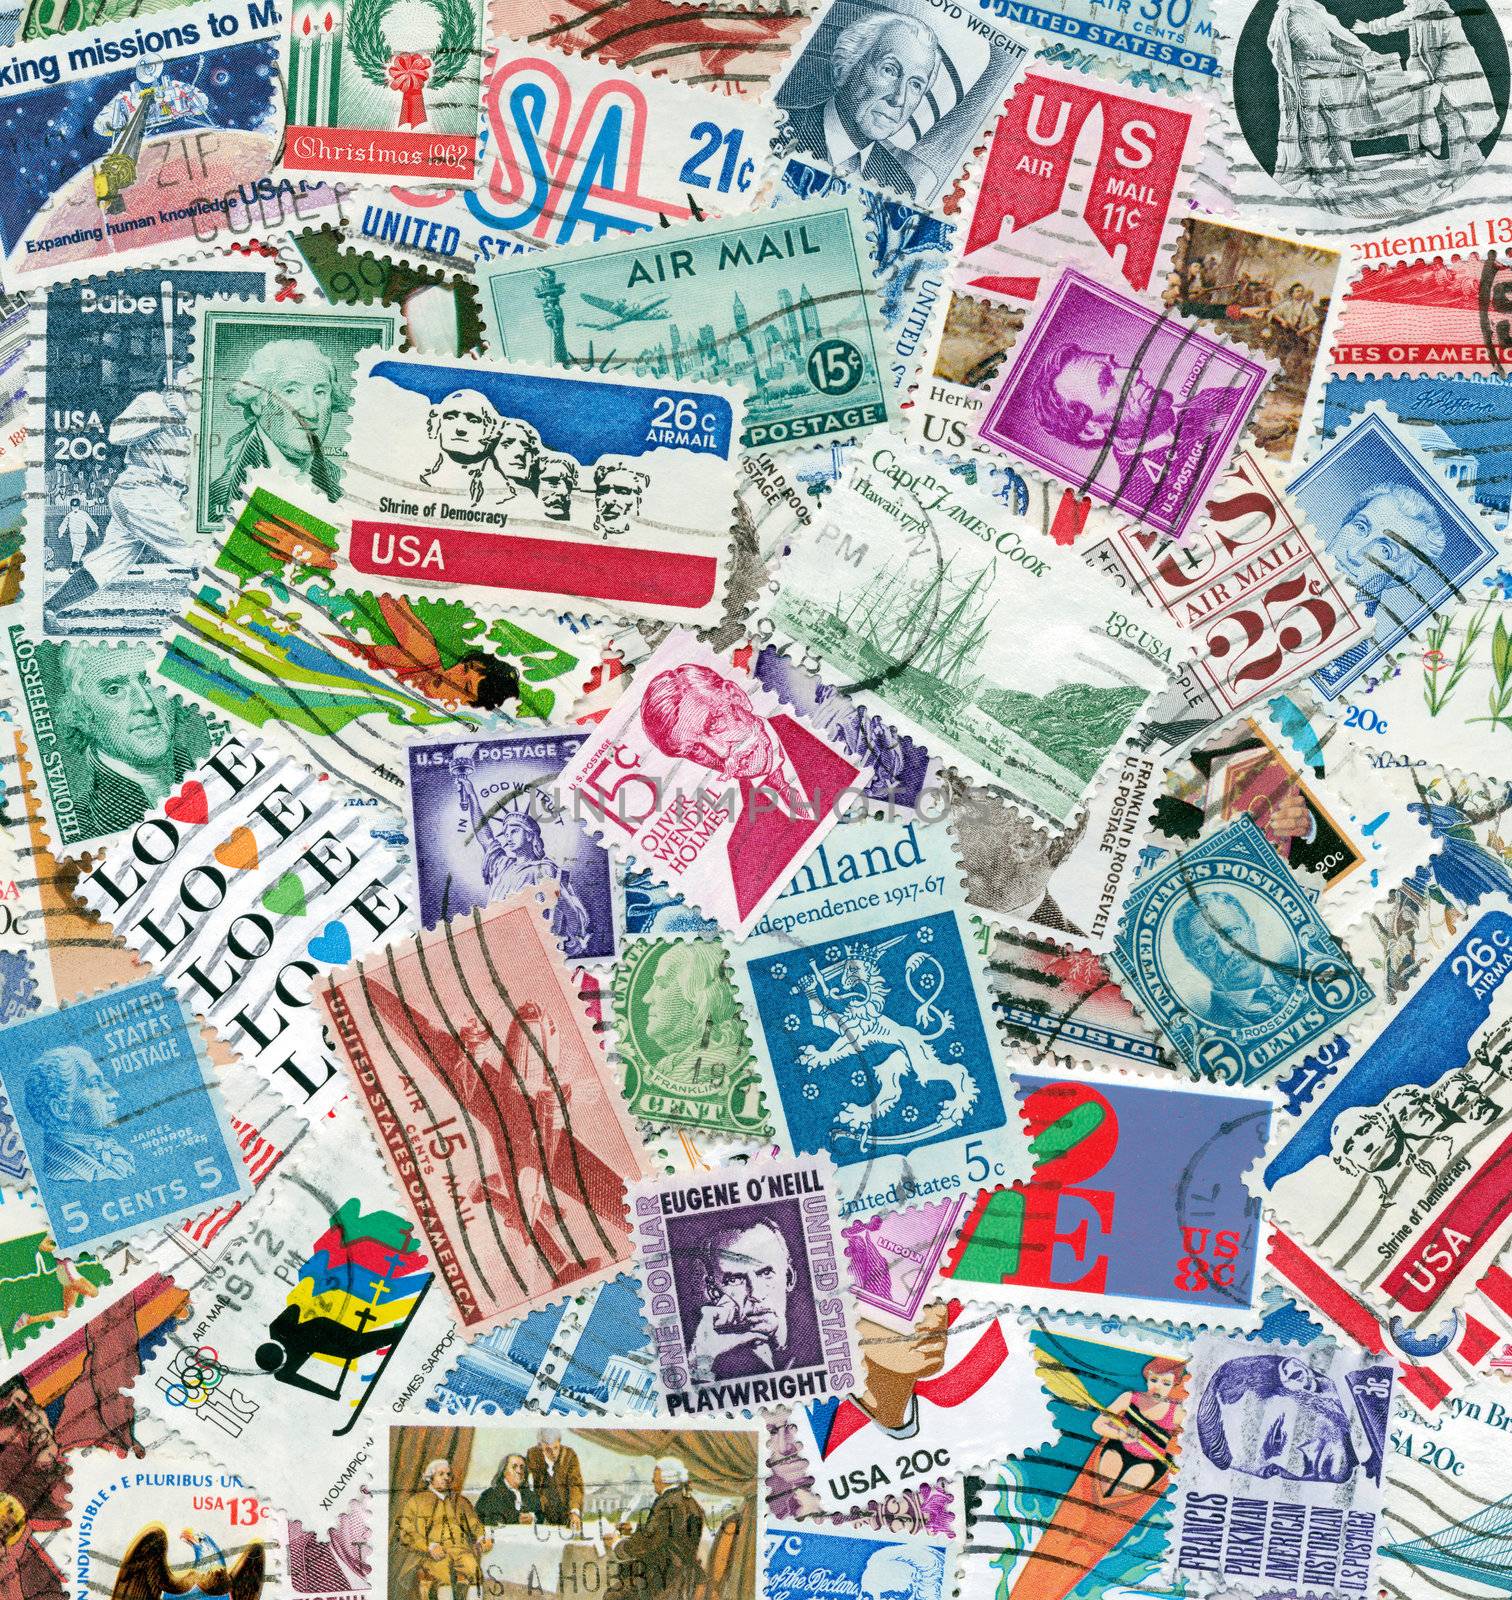 USA Stamps by Stocksnapper